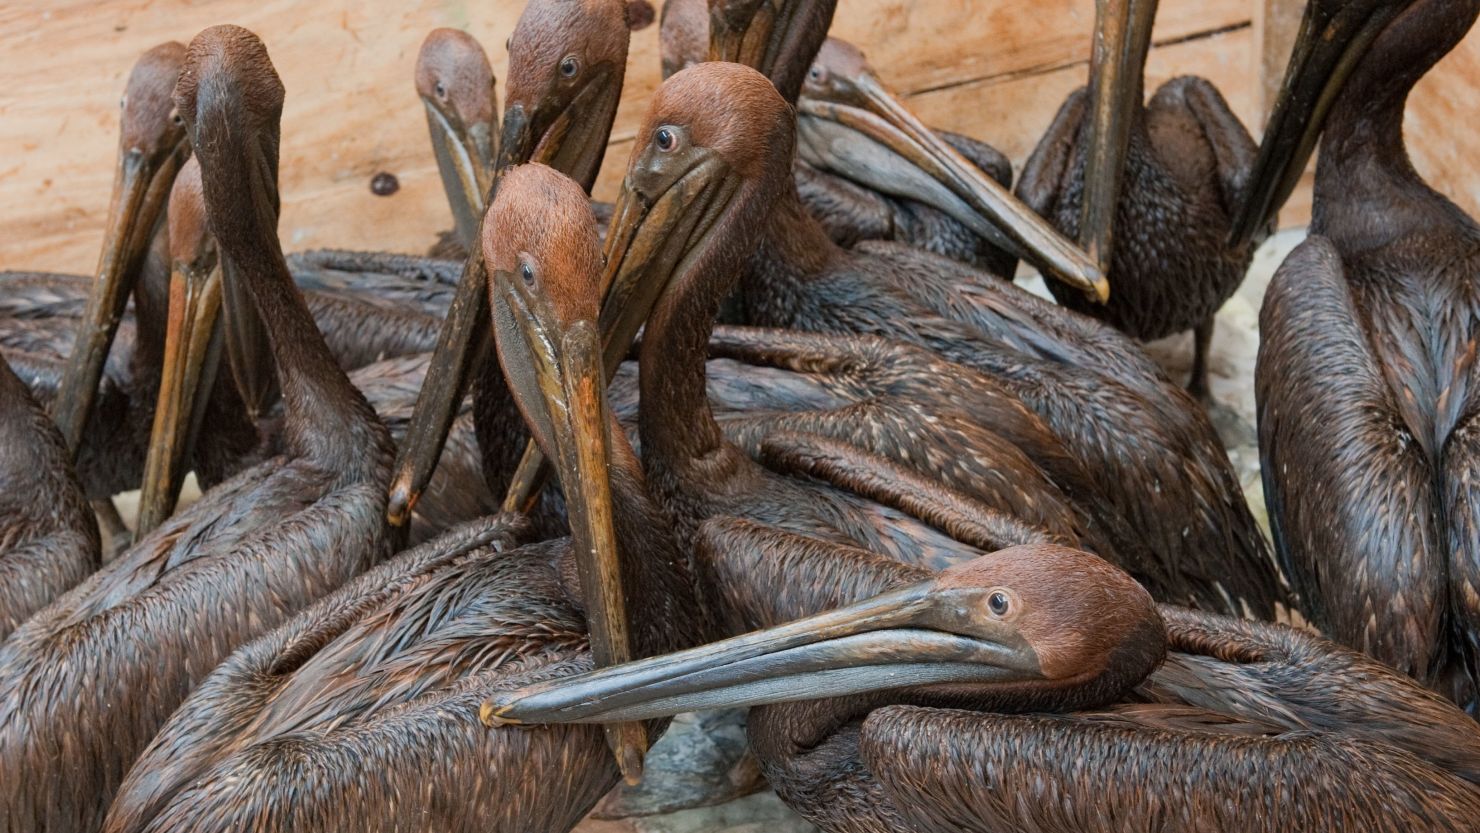 Pelicans covered in oil after the BP Gulf of Mexico spill